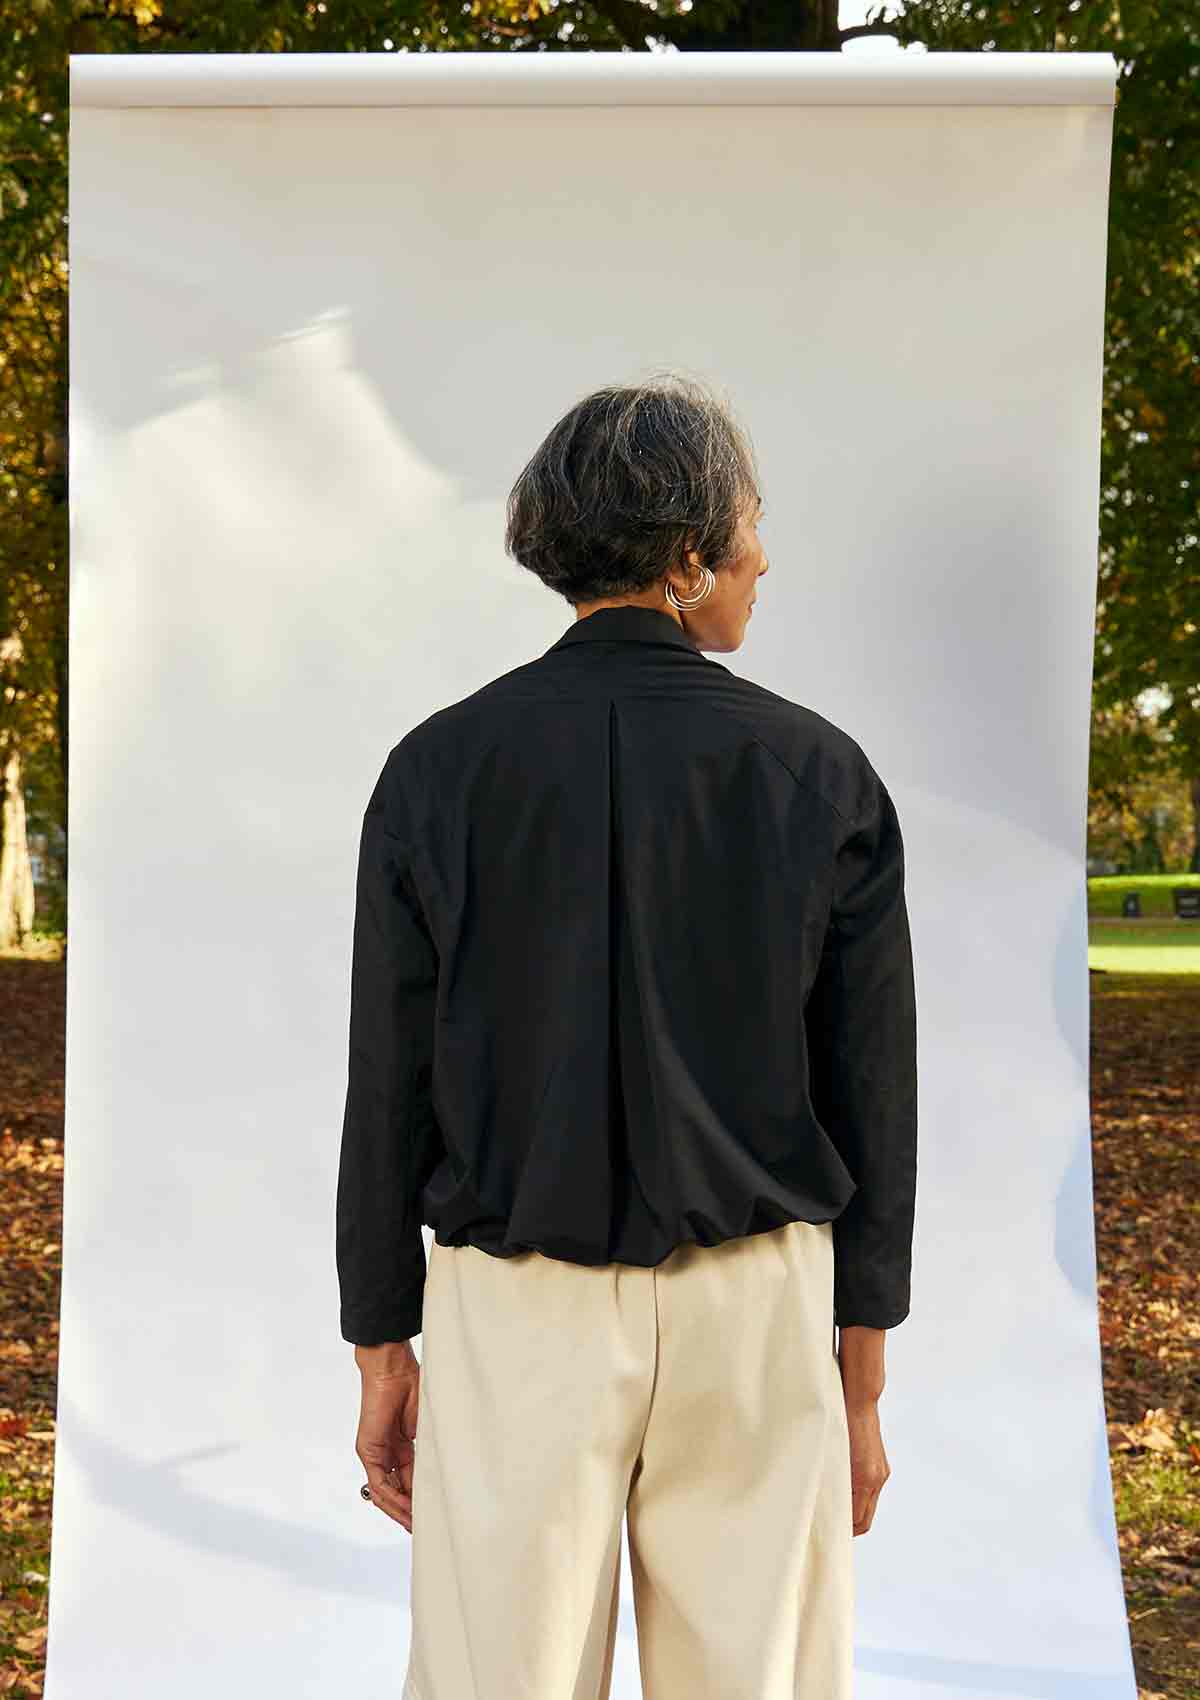 Women, standing back on, wearing the Asmuss Roam Jacket showing the inverted pleat detail on the back, with her hands down by her sides. She is standing in front of a whte background in a park